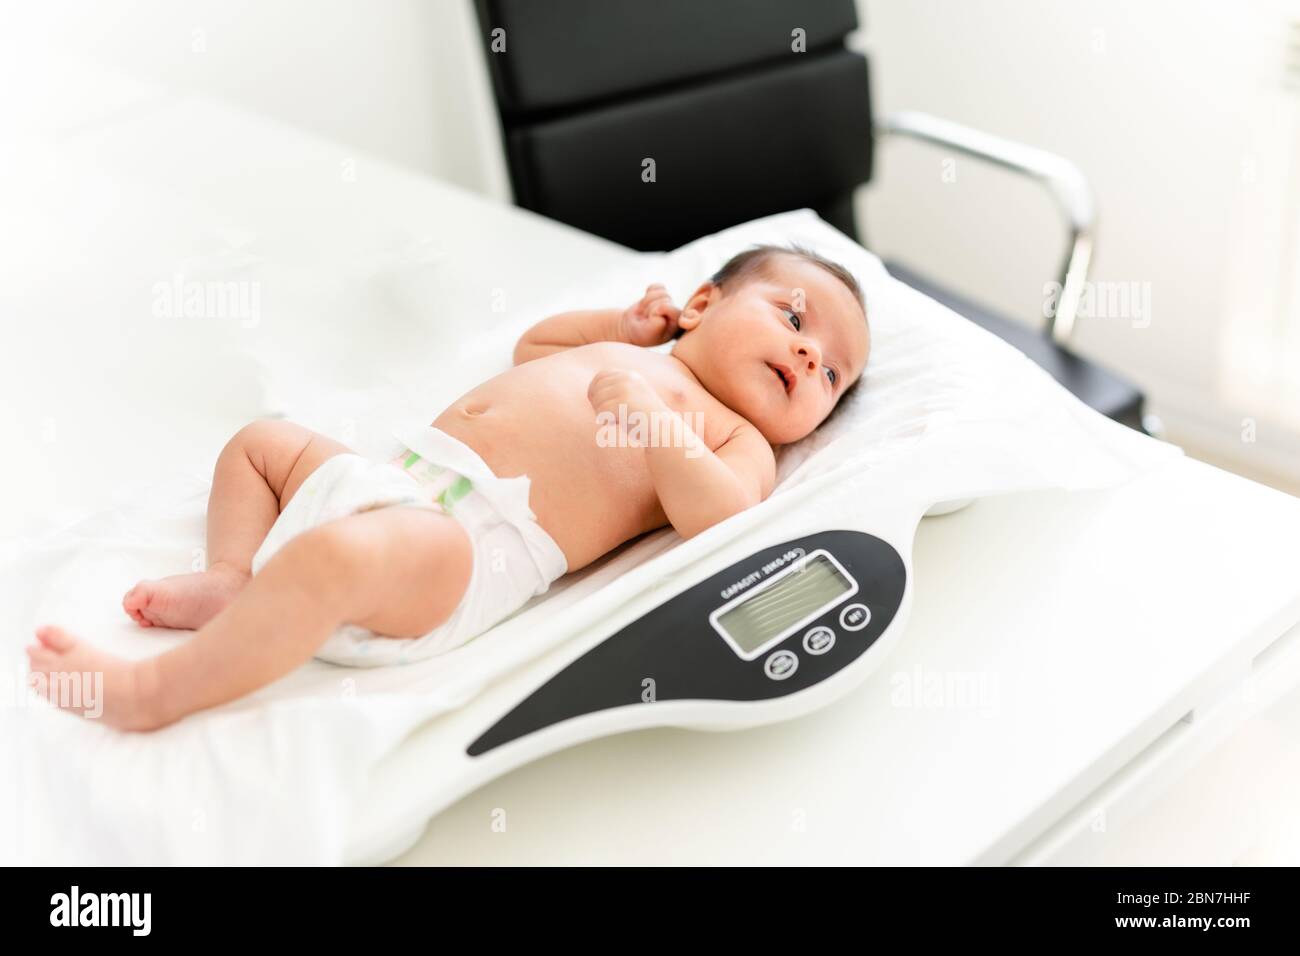 https://c8.alamy.com/comp/2BN7HHF/close-up-of-a-doctor-checking-weight-of-cute-little-baby-healthcare-concept-2BN7HHF.jpg